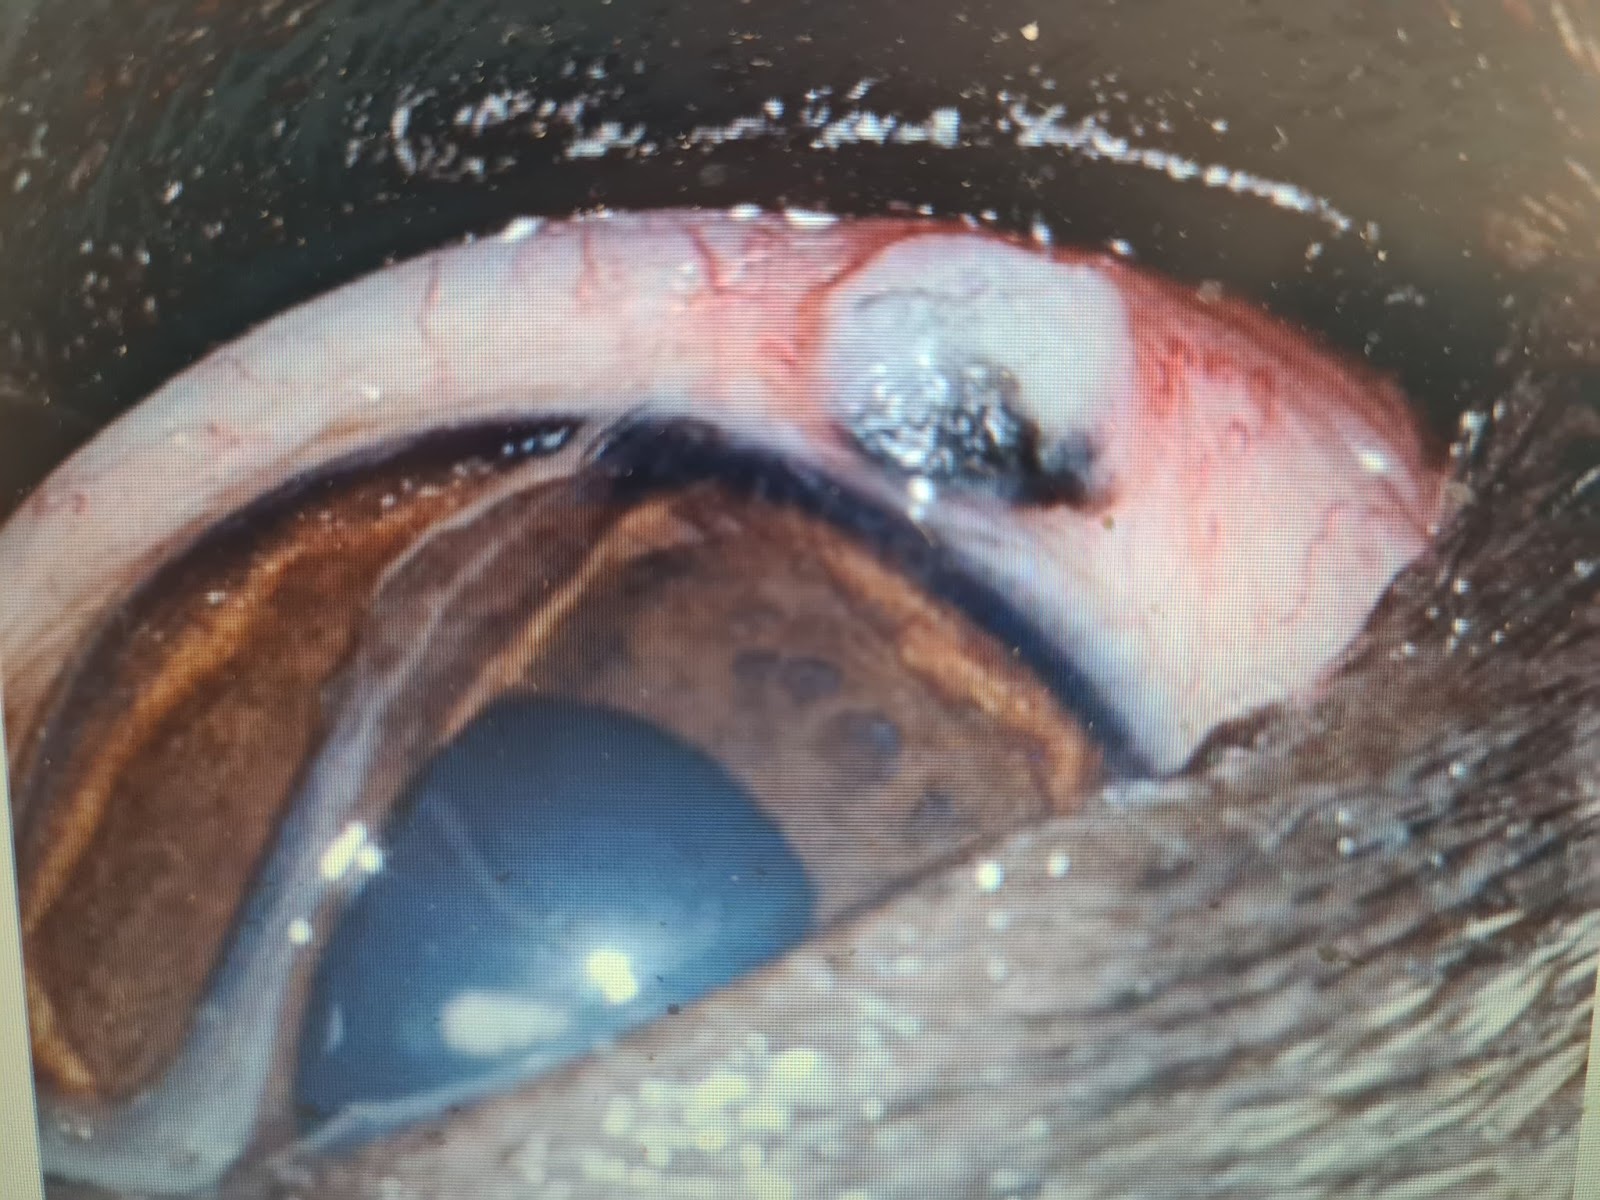 a wart or papilloma on the conjunctiva of a dog's eye